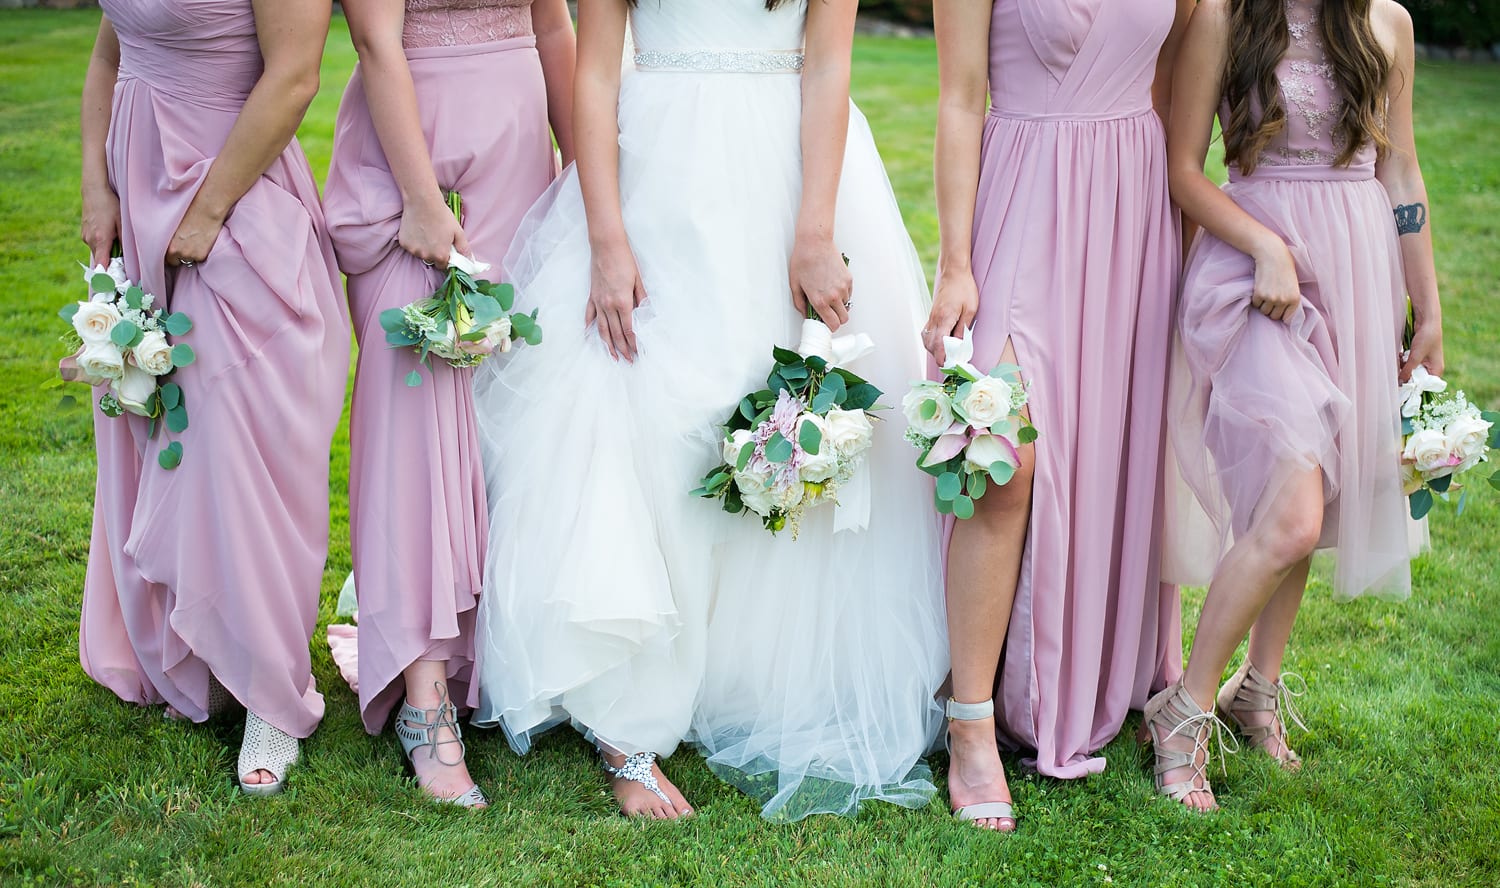 Bridesmaids and flowers and dresses at Axton Events Bellingham wedding venue